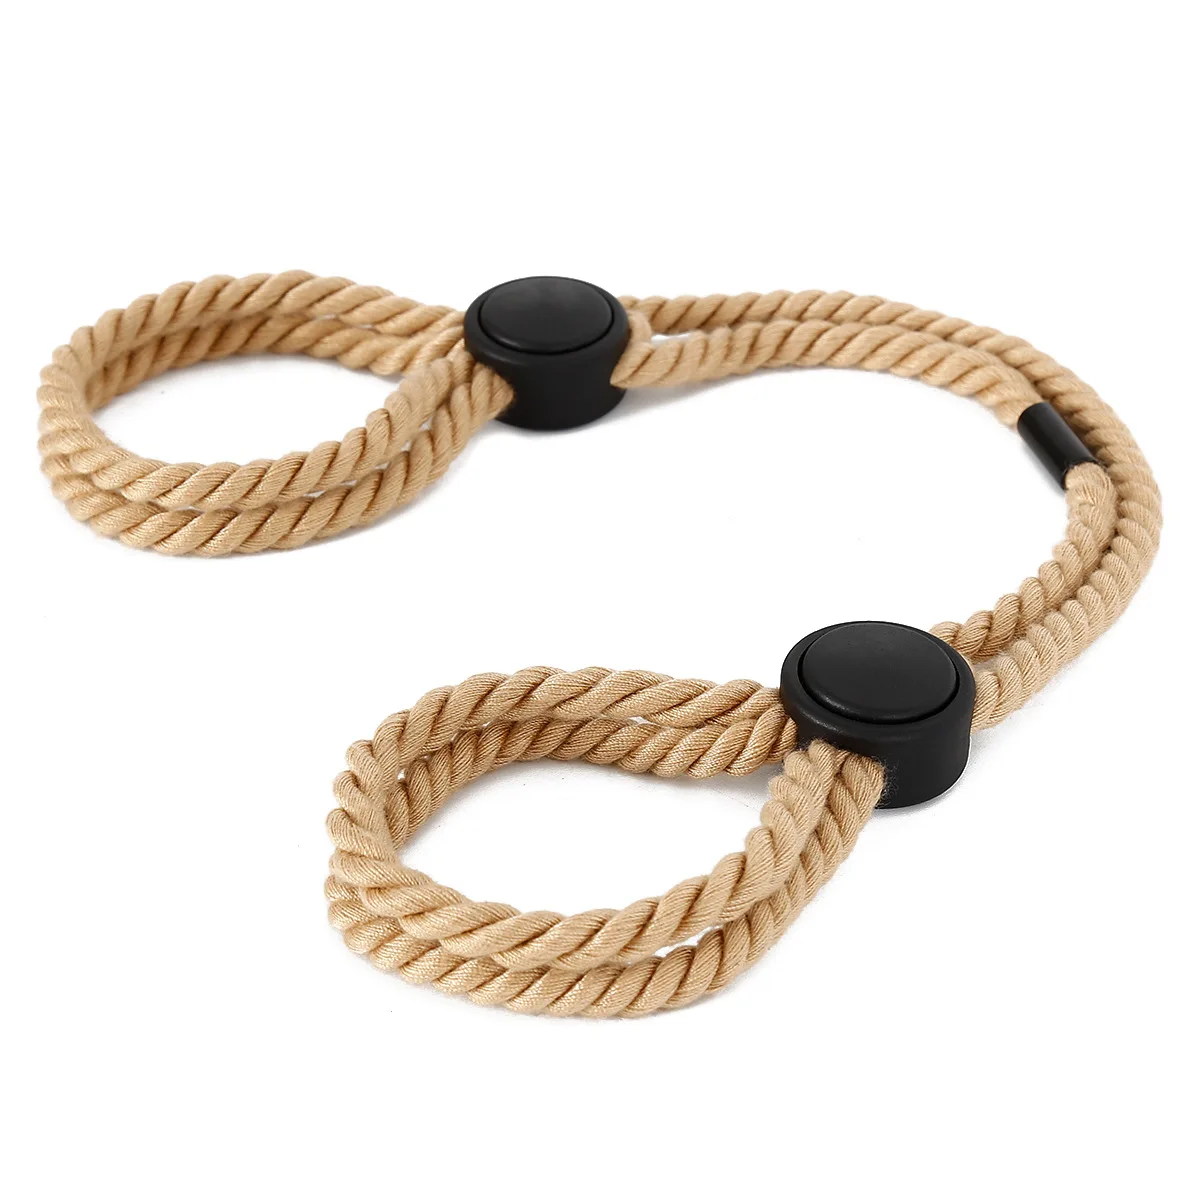 Cotton rope Sex Handcuffs Ankle Cuff Restraints Bondage Bracelet BDSM Woman Erotic Adult Sex Toys For Couples Exotic Accessorie Sex Toys For Women cb5feb1b7314637725a2e7: Black|Brown|Red